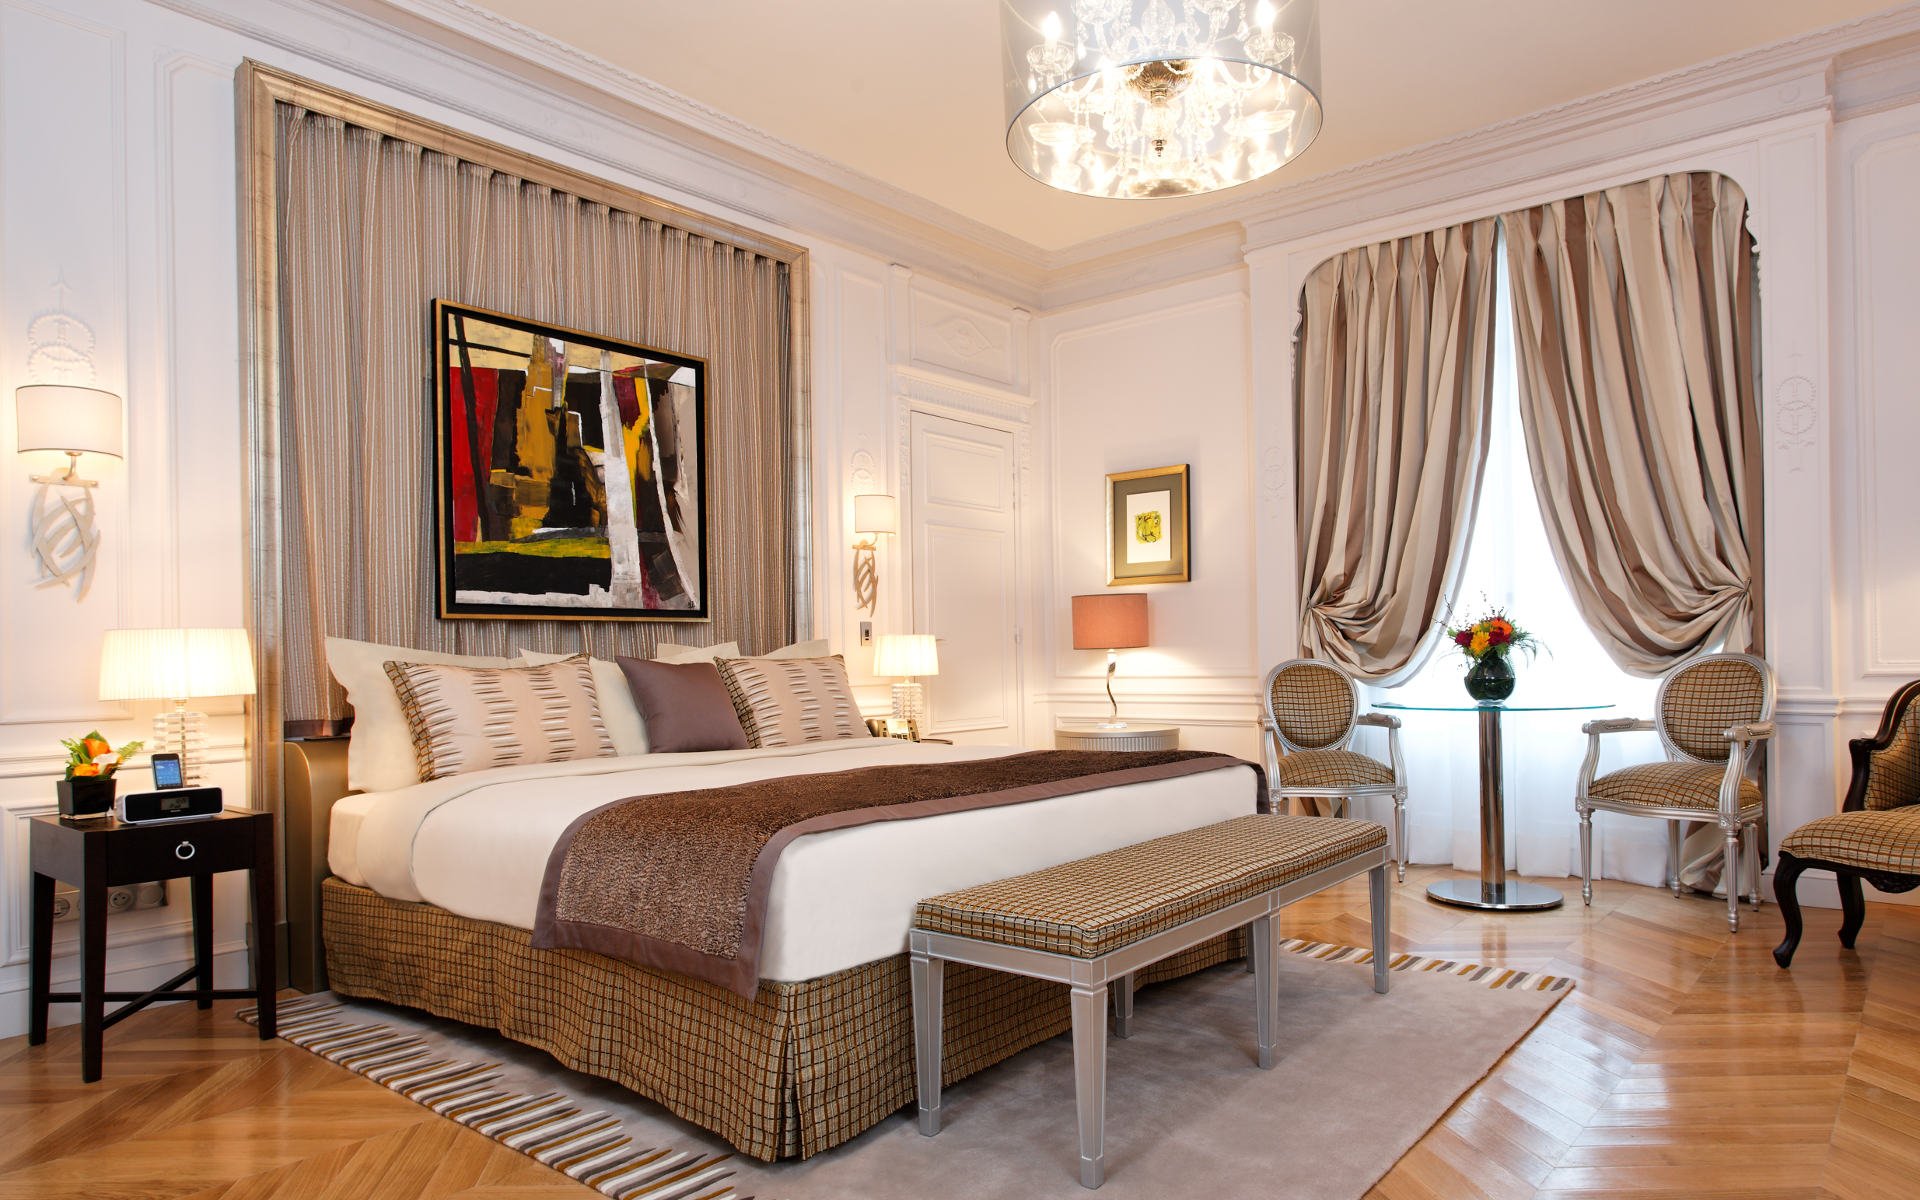 260/Rooms/Grand deluxe/Room Grand Deluxe 5-  Majestic Hotel-Spa.jpg